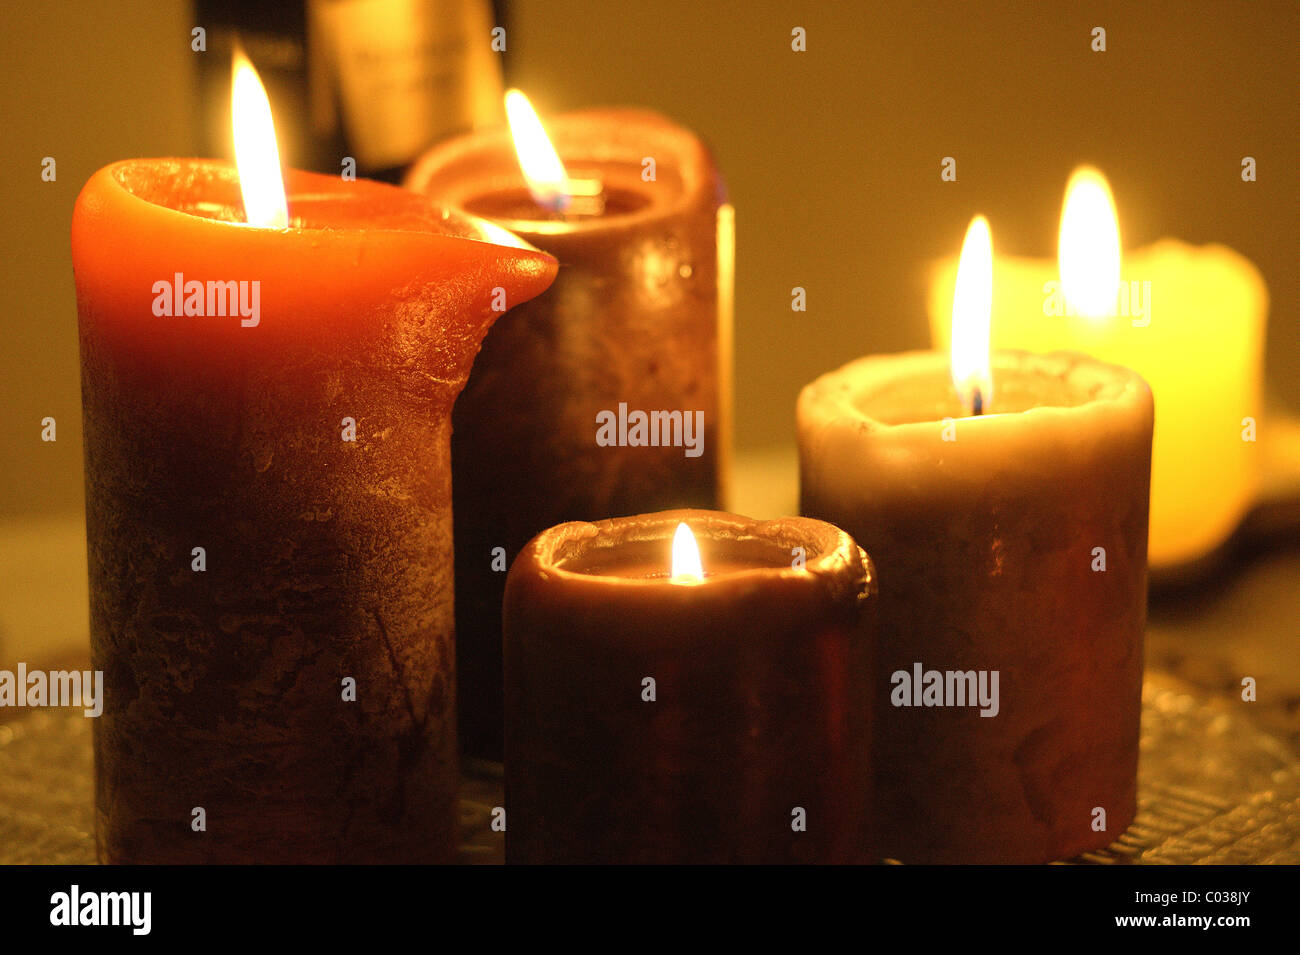 Burning wax candle candles warmth homelike Stock Photo